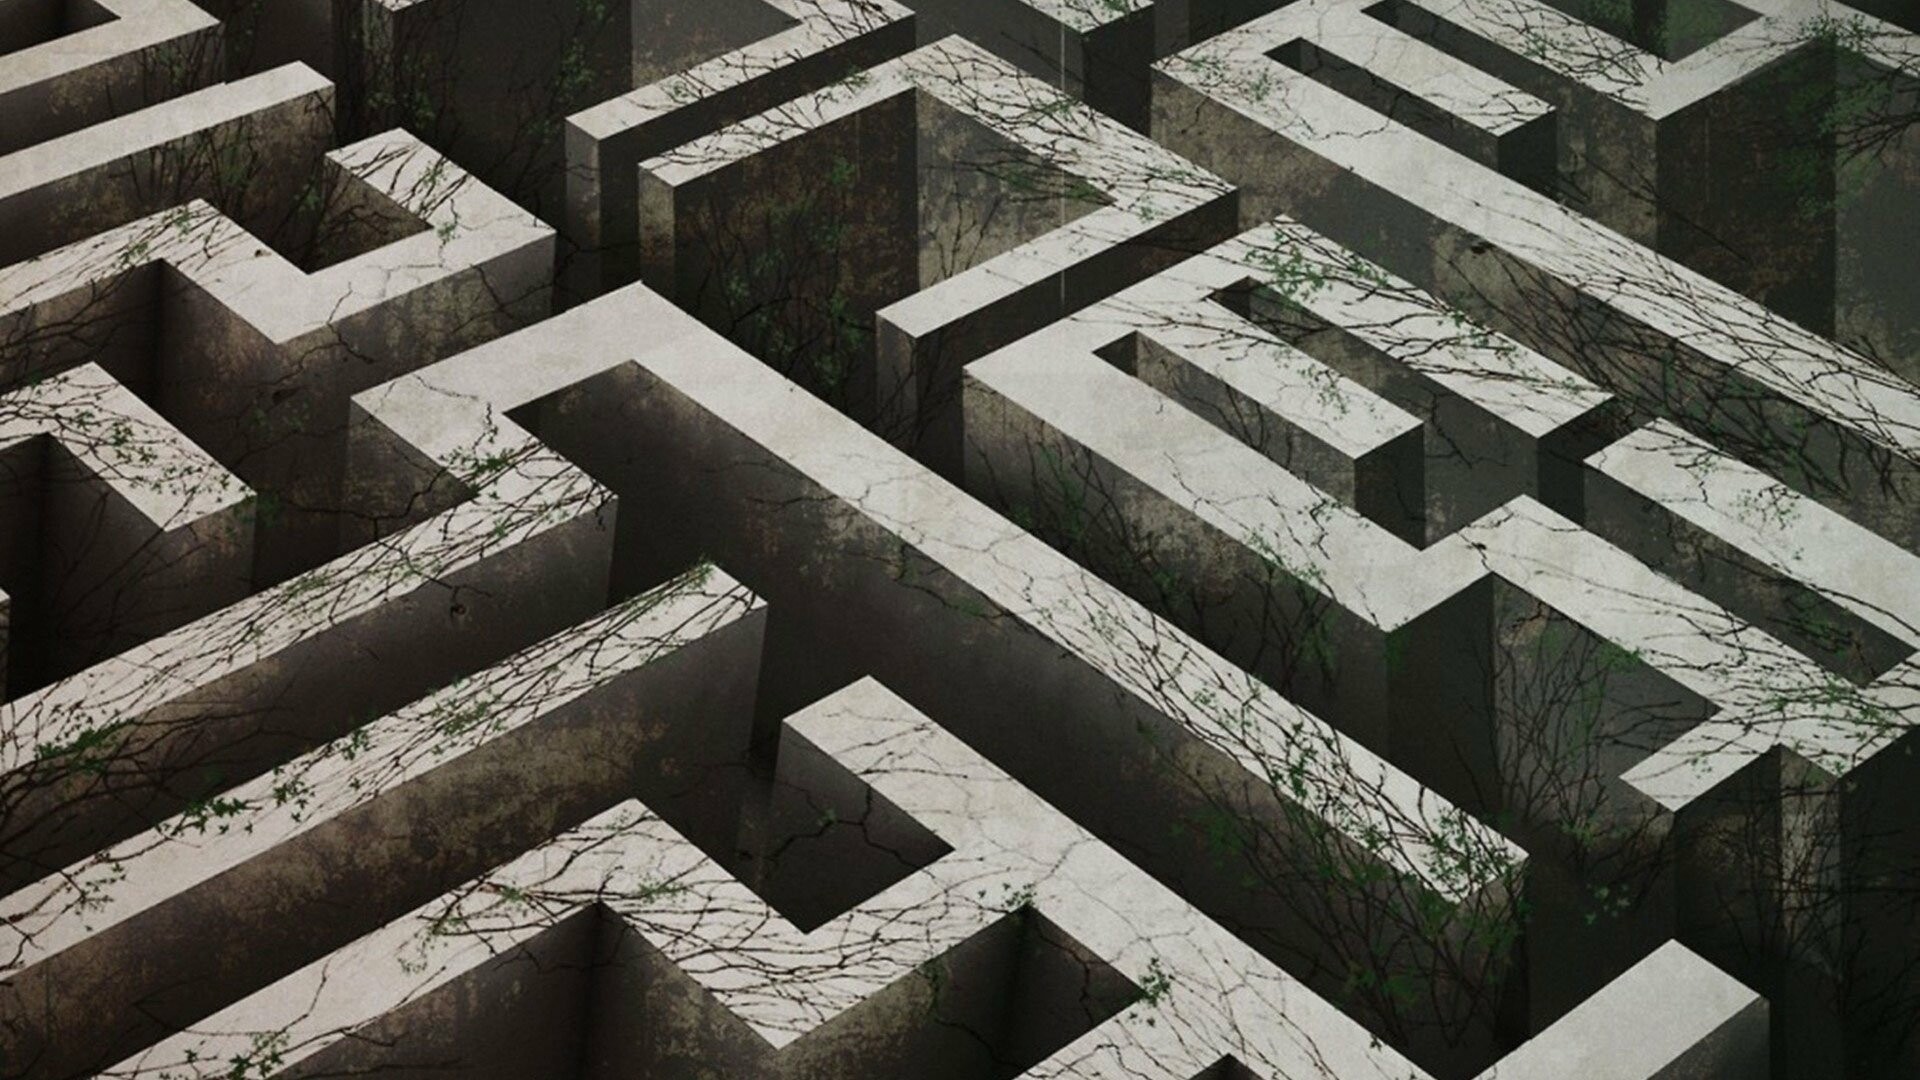 Labyrinth: A complex system of passages or paths between walls or hedges. 1920x1080 Full HD Background.